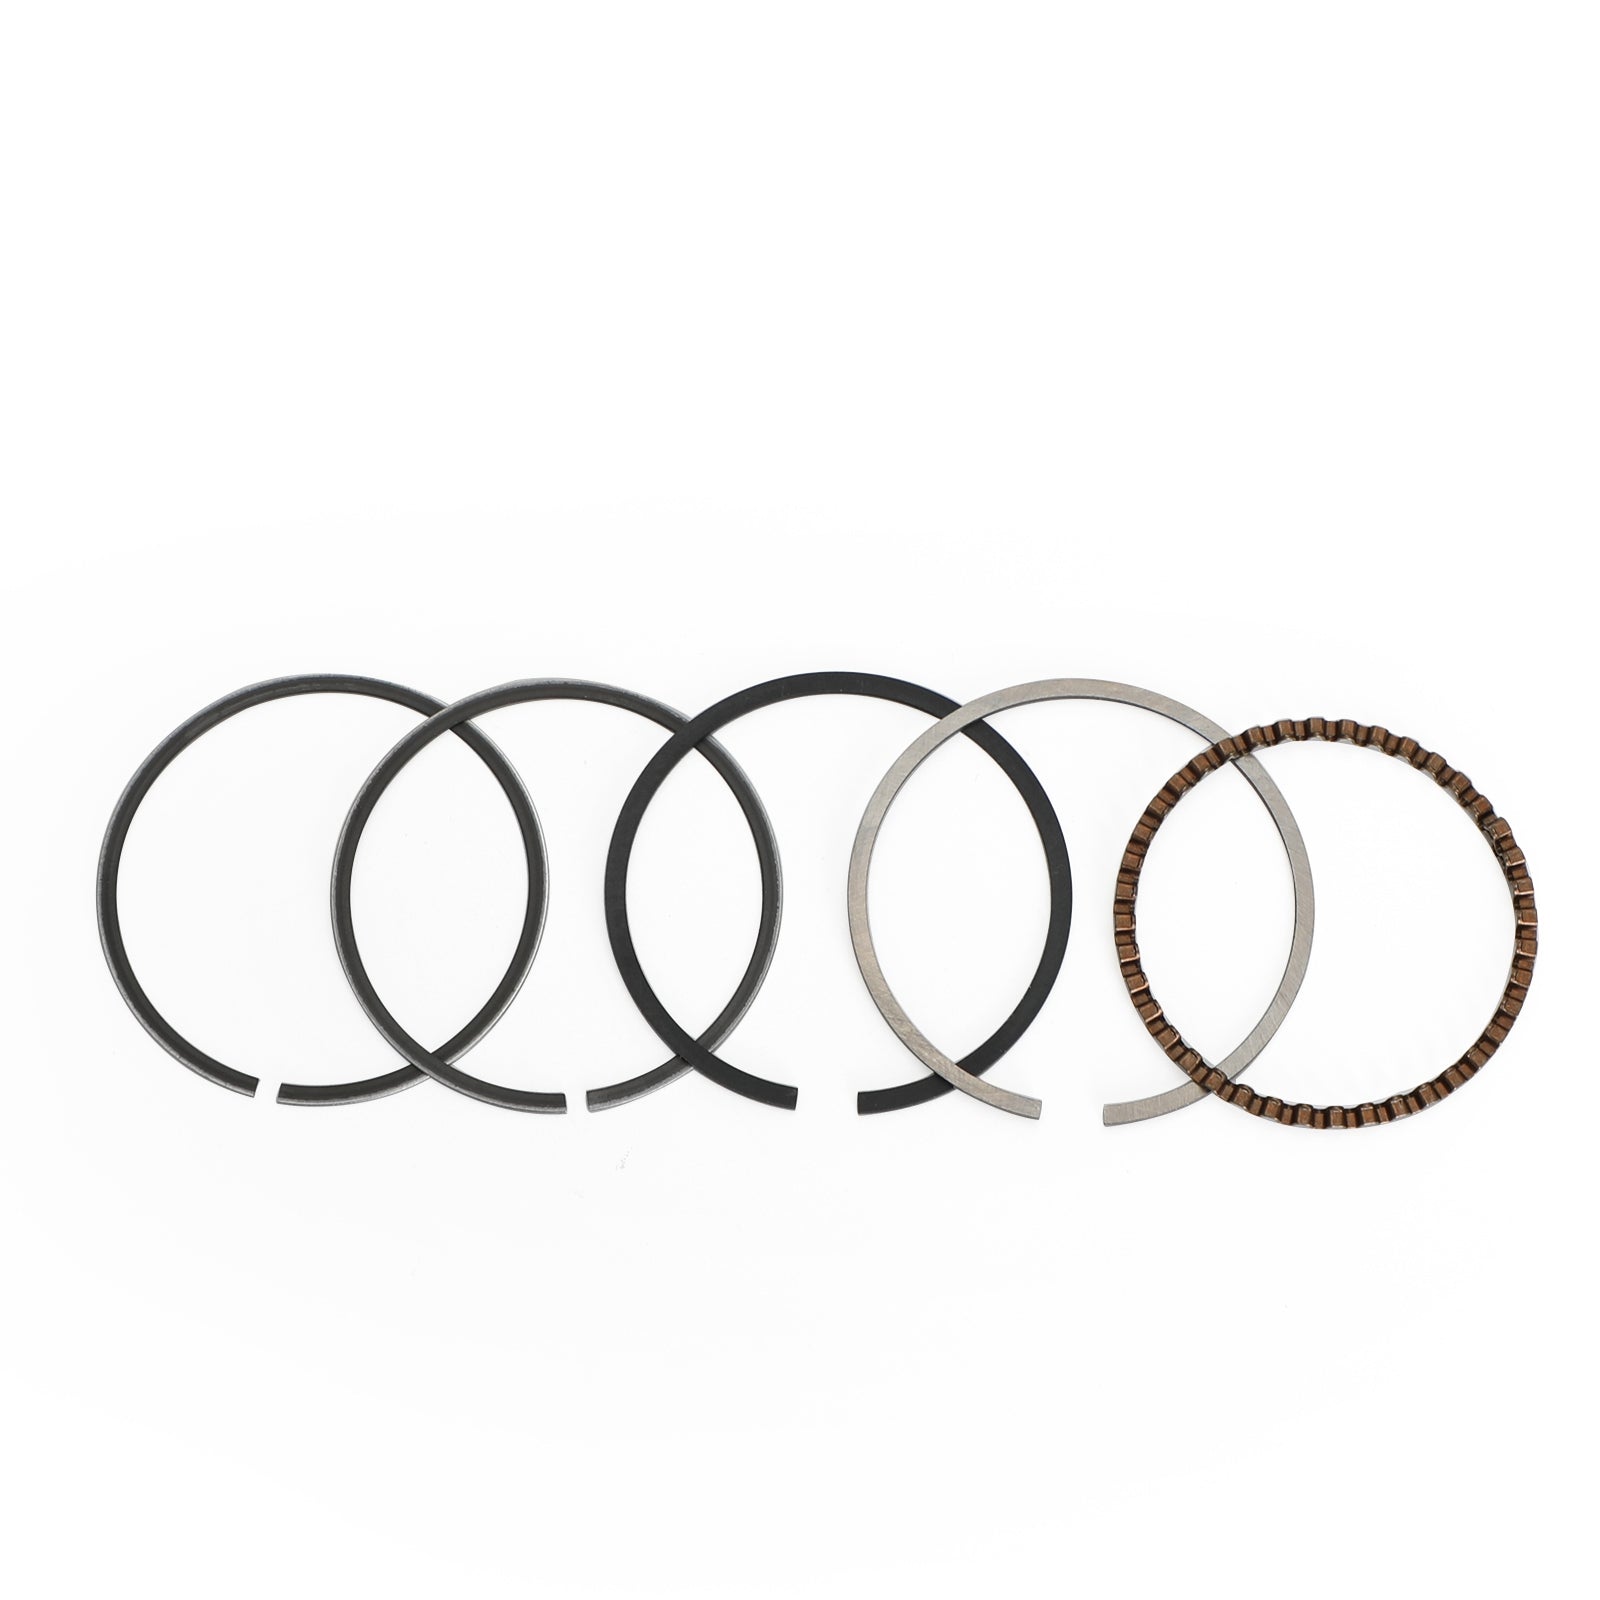 172cc CYLINDER UPGRADE KIT (61mm BORE) PISTON GASKET FOR GY6 125cc 150cc MOTORS Generic